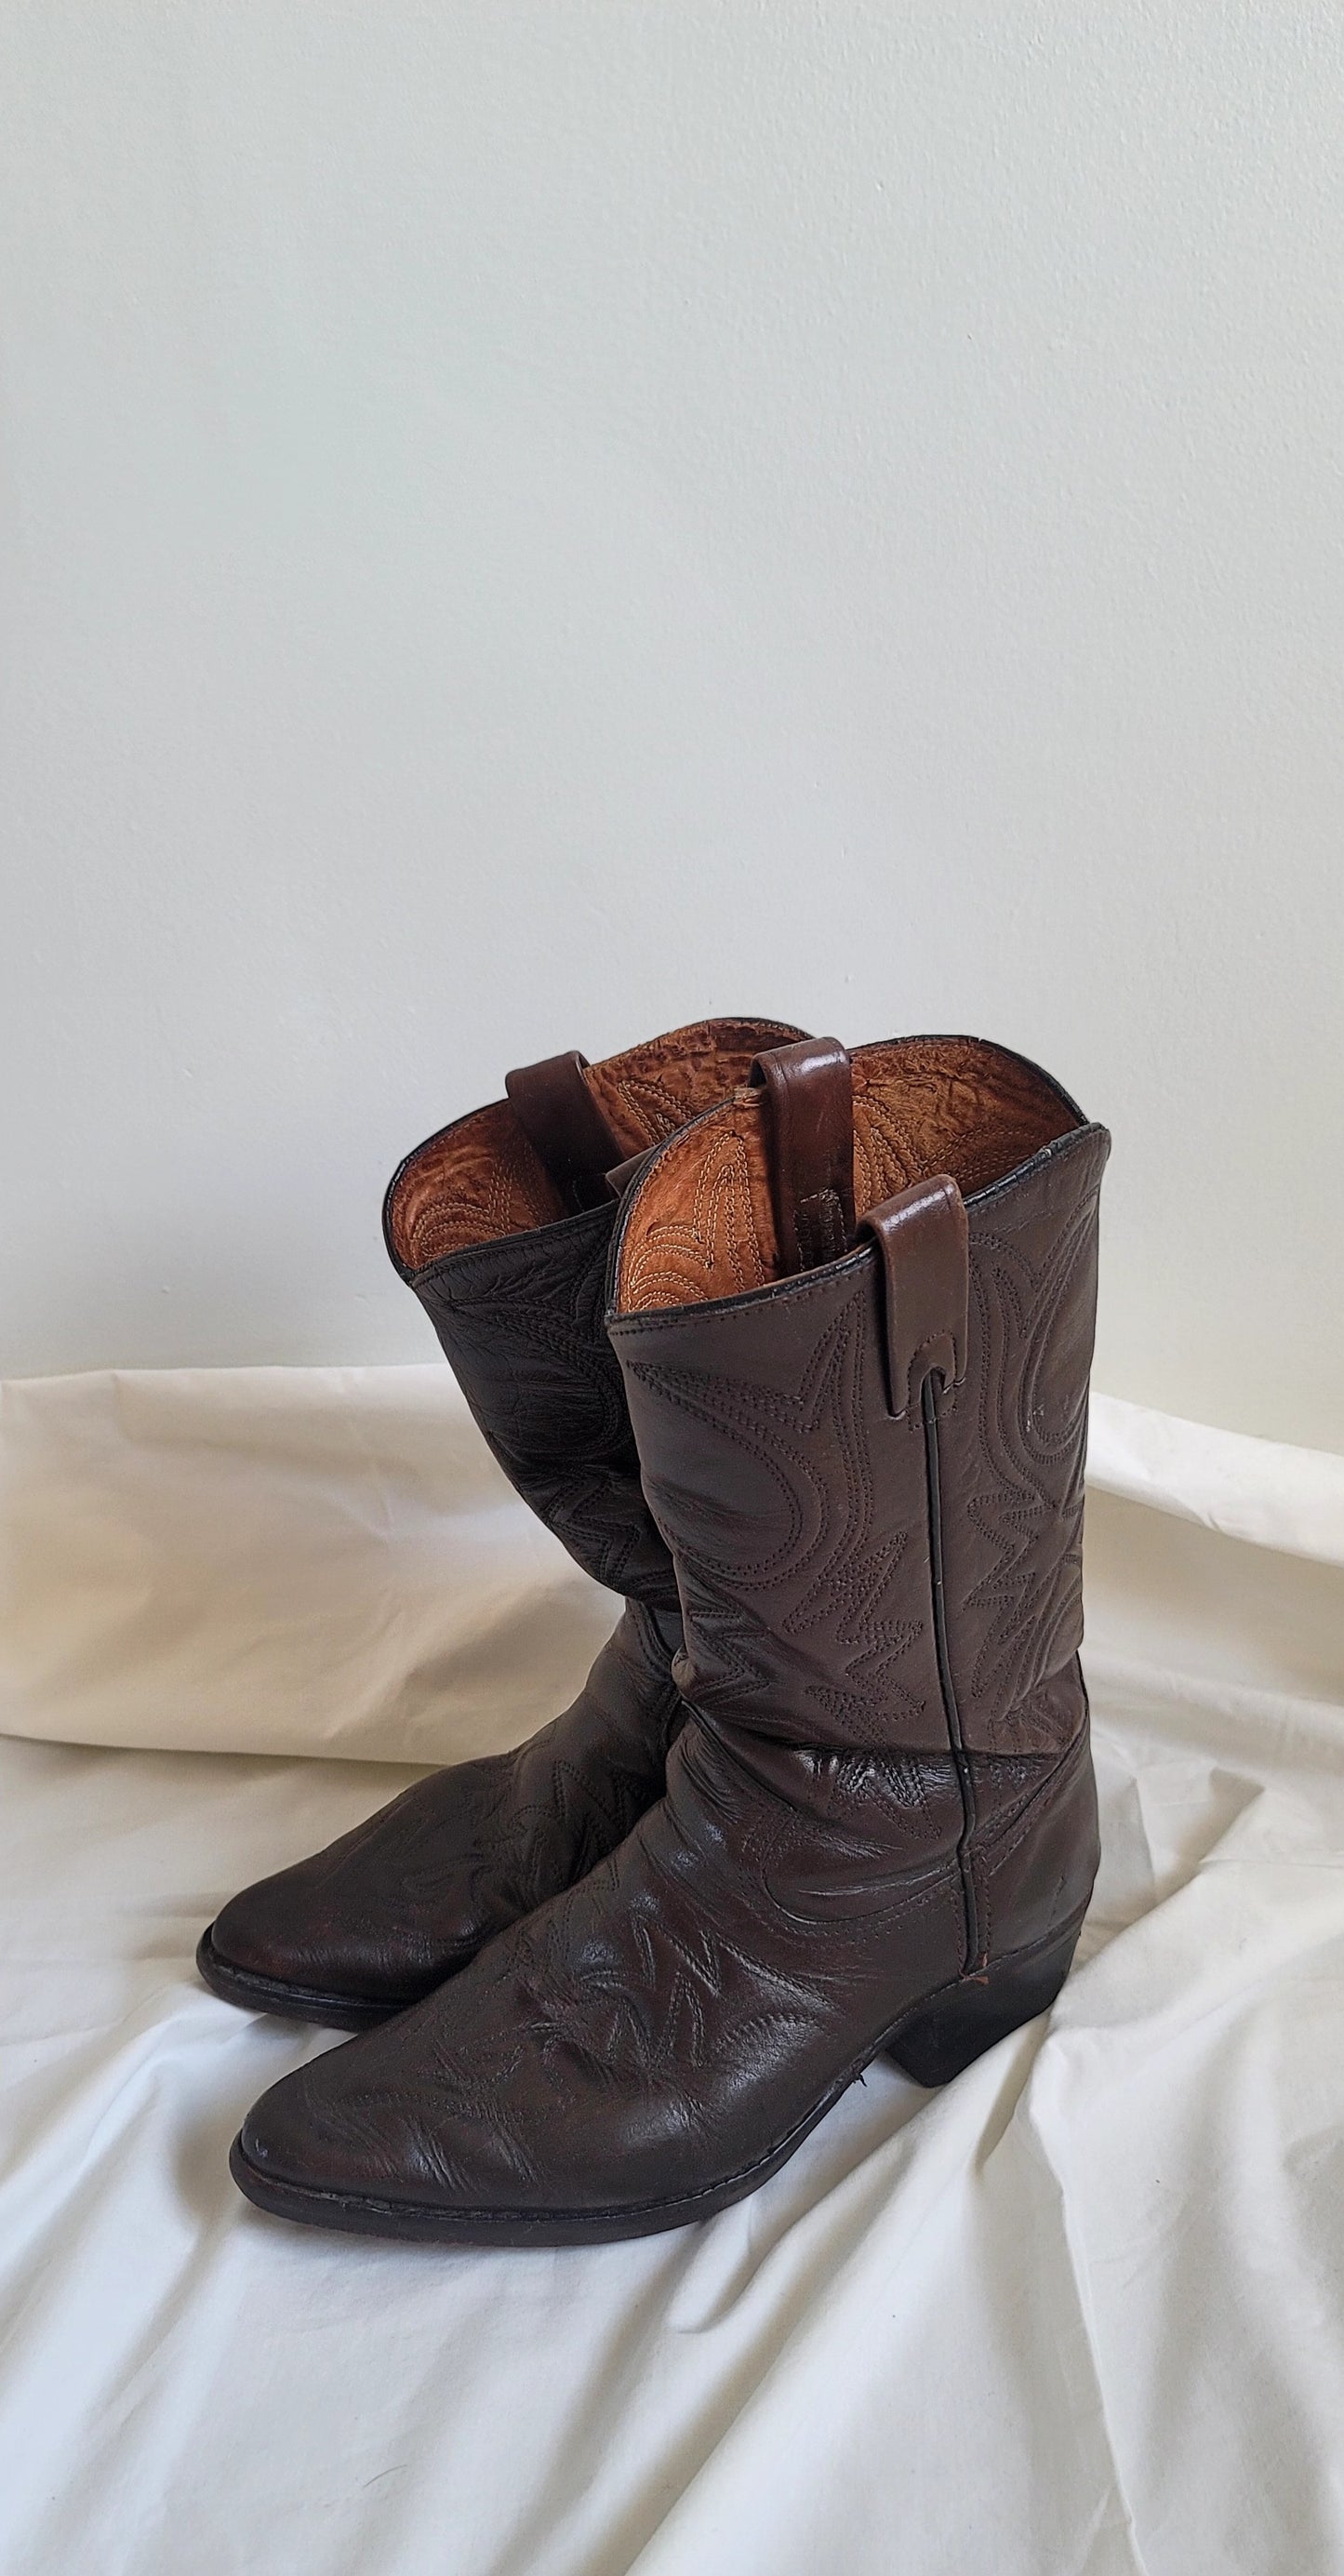 Vintage Cats Paw leather Cowboy boots